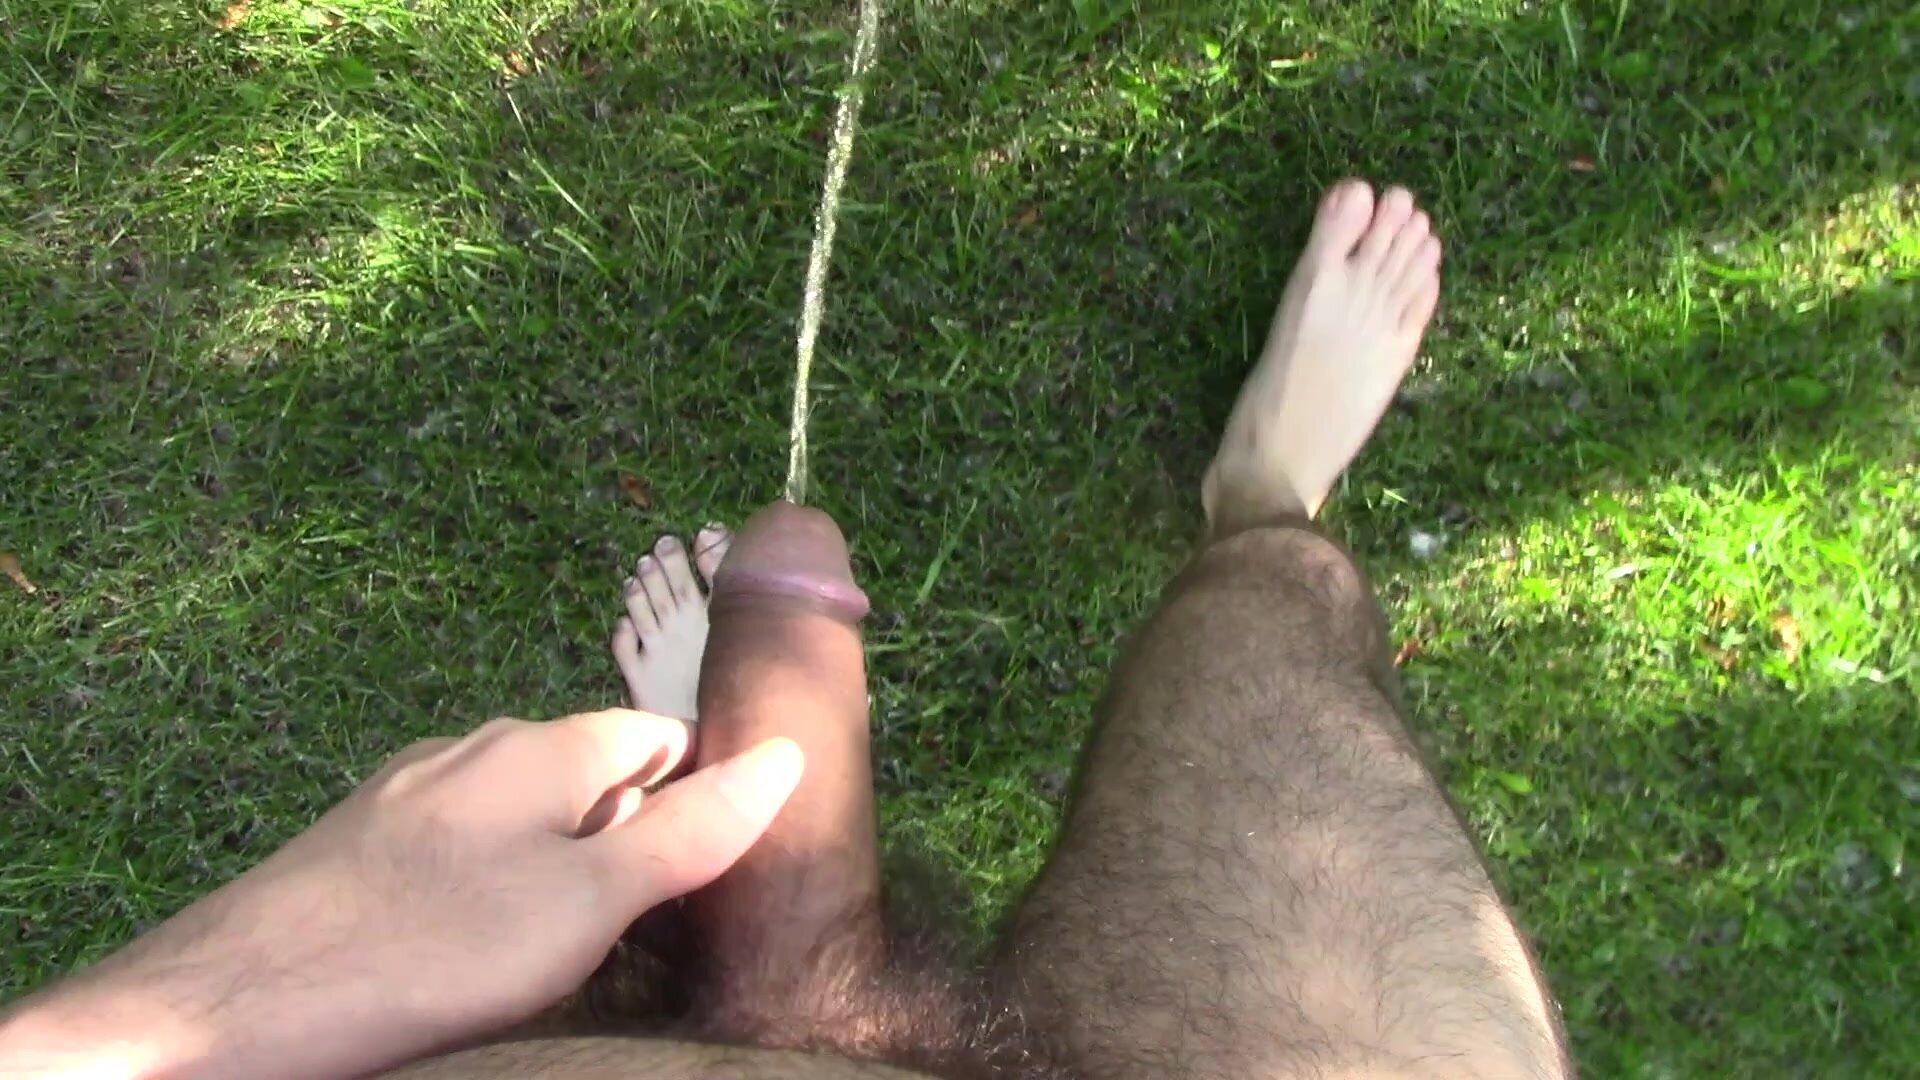 Me Naked Pissing While Walking 2